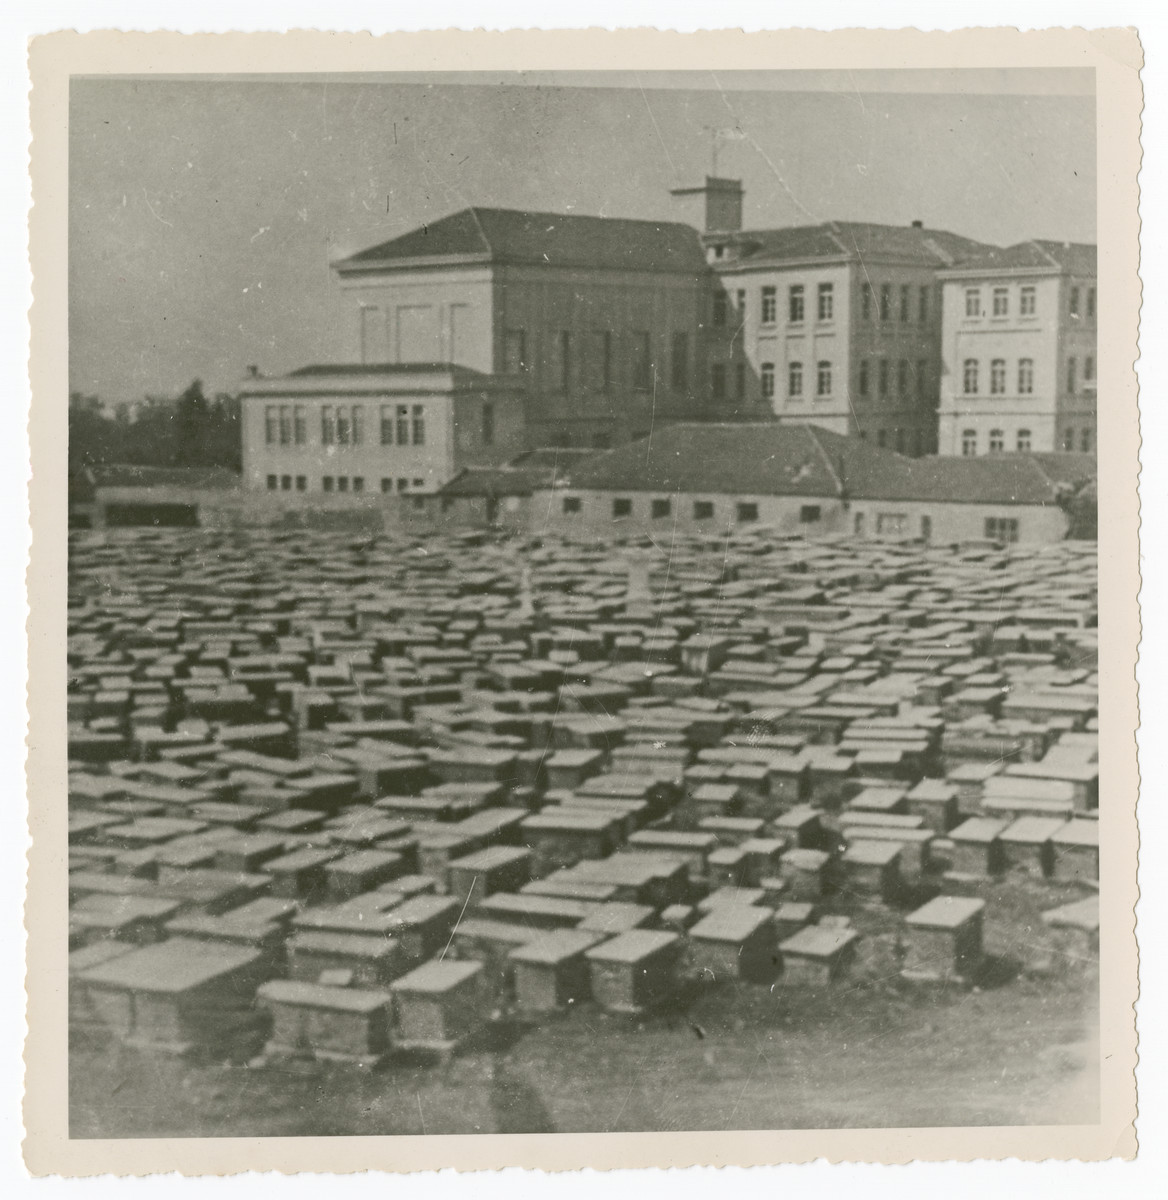 View of the Jewish cemetery in Salonika.

The original caption reads "Cemetery prewar.  500,000 graves in past 500 years."